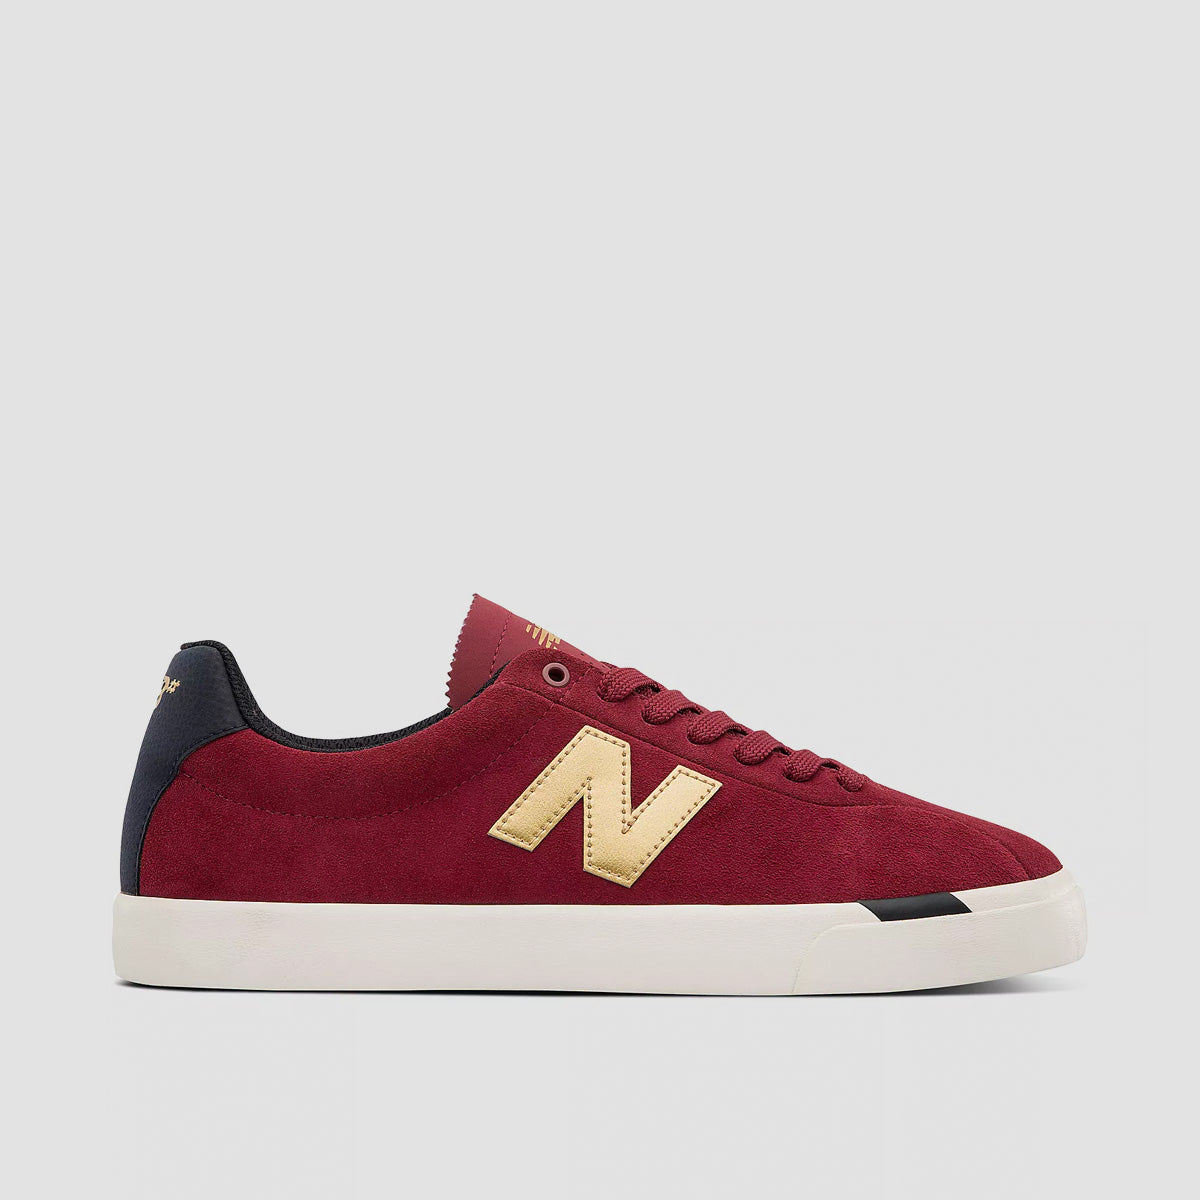 New Balance NM22 Shoes - Red/Gold